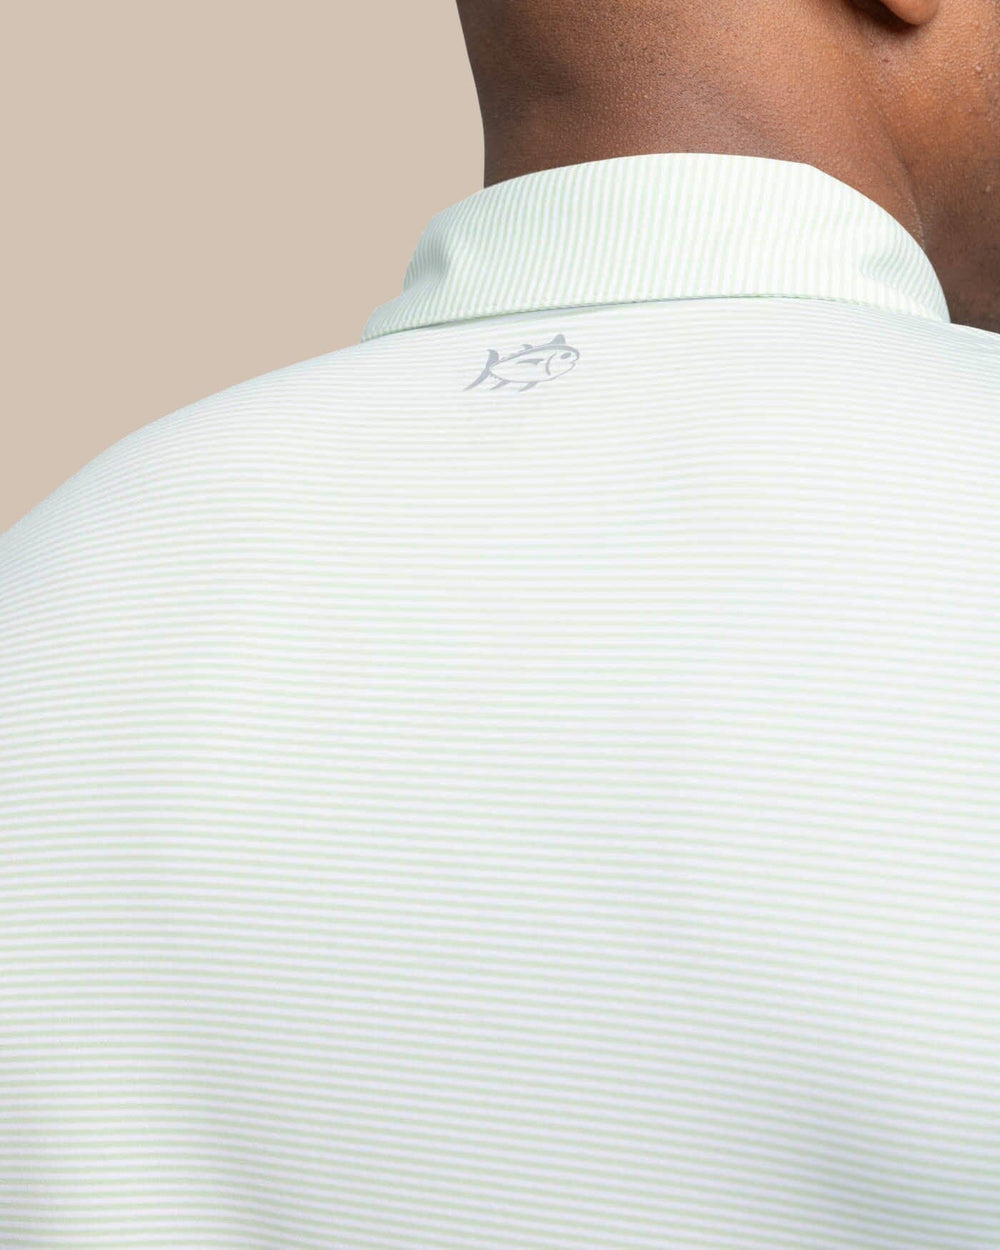 The detail view of the Southern Tide brrr-eeze Meadowbrook Stripe Polo by Southern Tide - Smoke Green